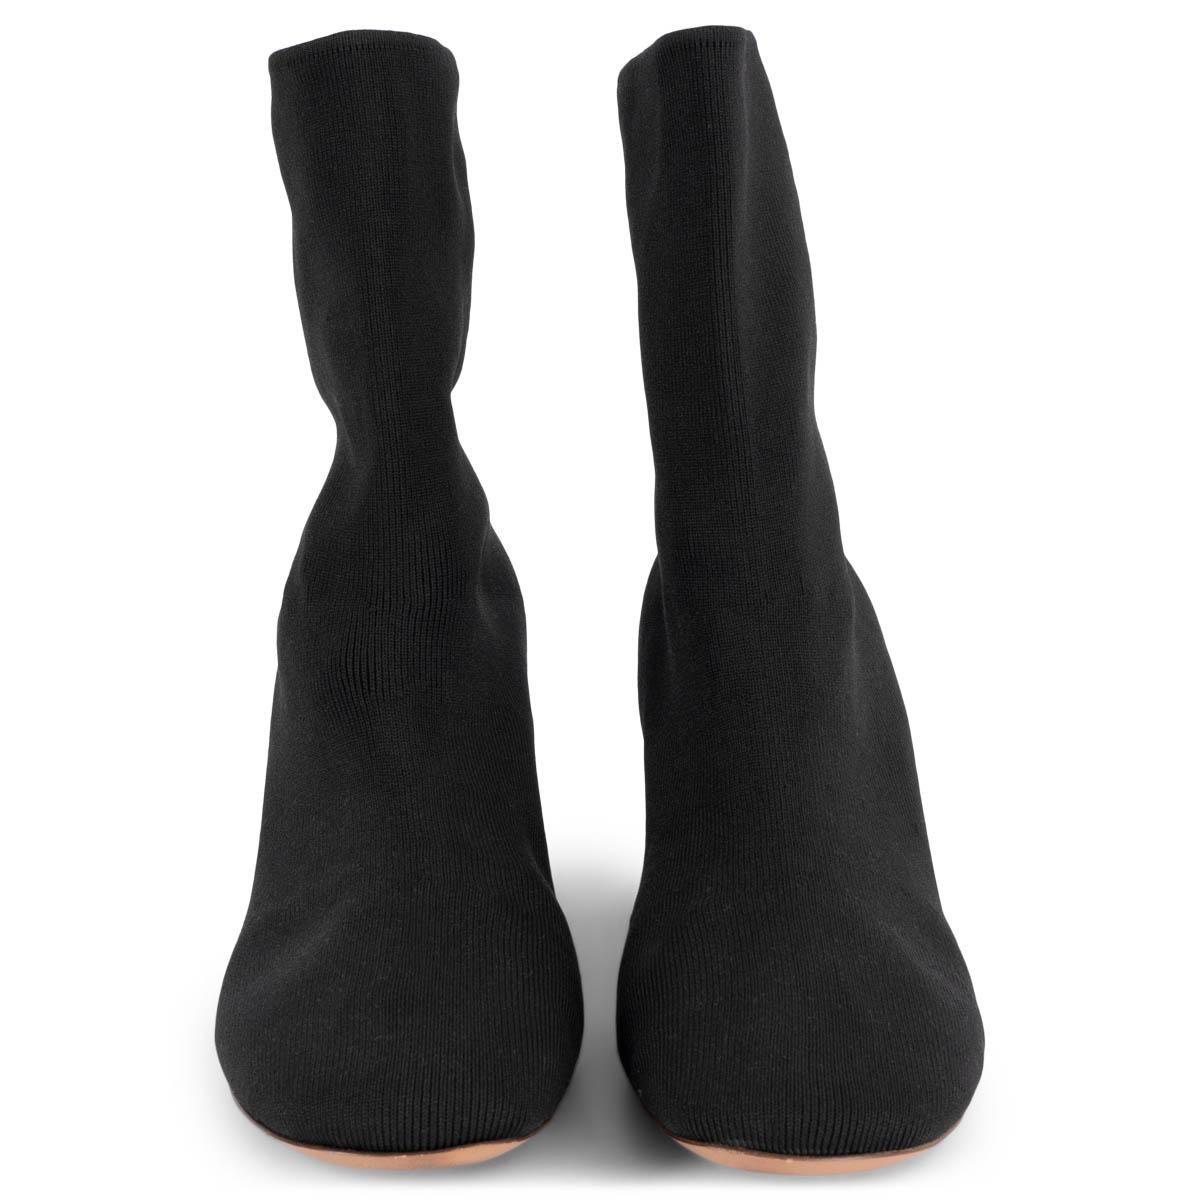 100% authentic Céline block-heel knit sock ankle-boots in black stretchy fabric. Have been worn and are in excellent condition. 

Measurements
Imprinted Size	37.5 (run 1/2 larger)
Shoe Size	38
Inside Sole	25cm (9.8in)
Width	7.5cm (2.9in)
Heel	7cm